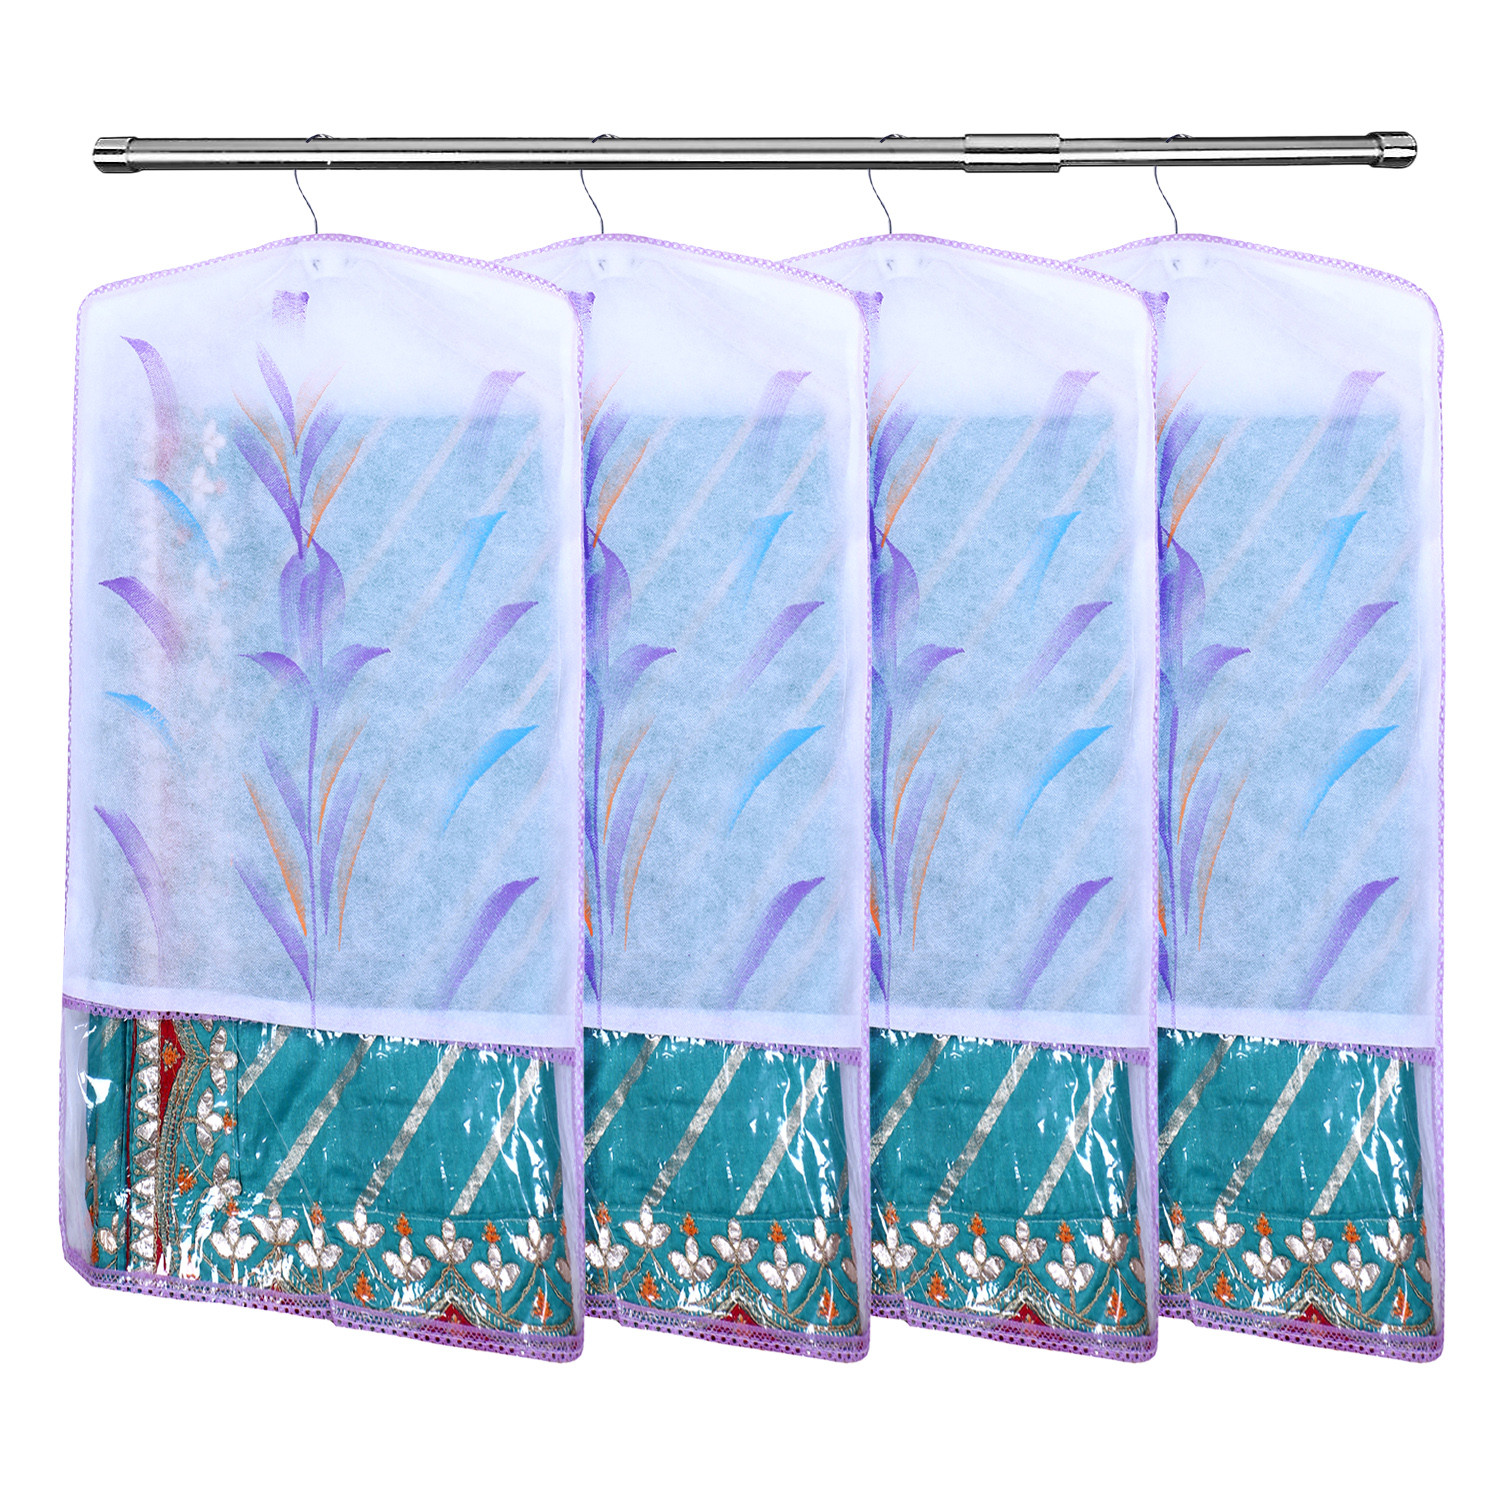 Kuber Industries Hanging Saree Cover | Brush Painting Pattern Saree Cover | Non-Woven Saree Covers for Home | Saree Cover with Small Transparent view |  Purple